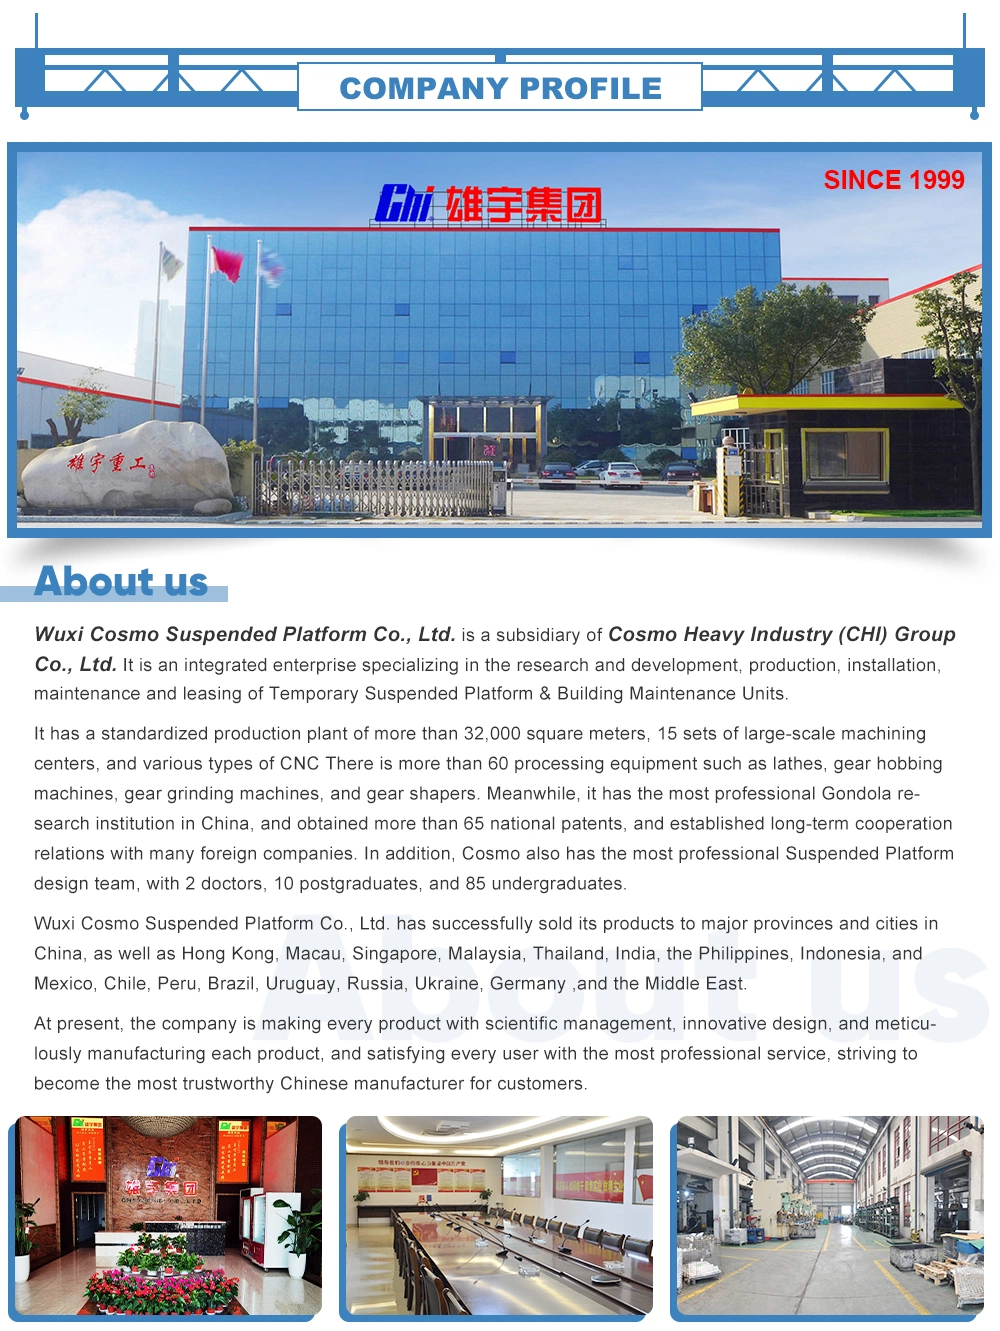 Cleaning Equipment Building Glass Support Customize Building Maintenance Unit (BMU)